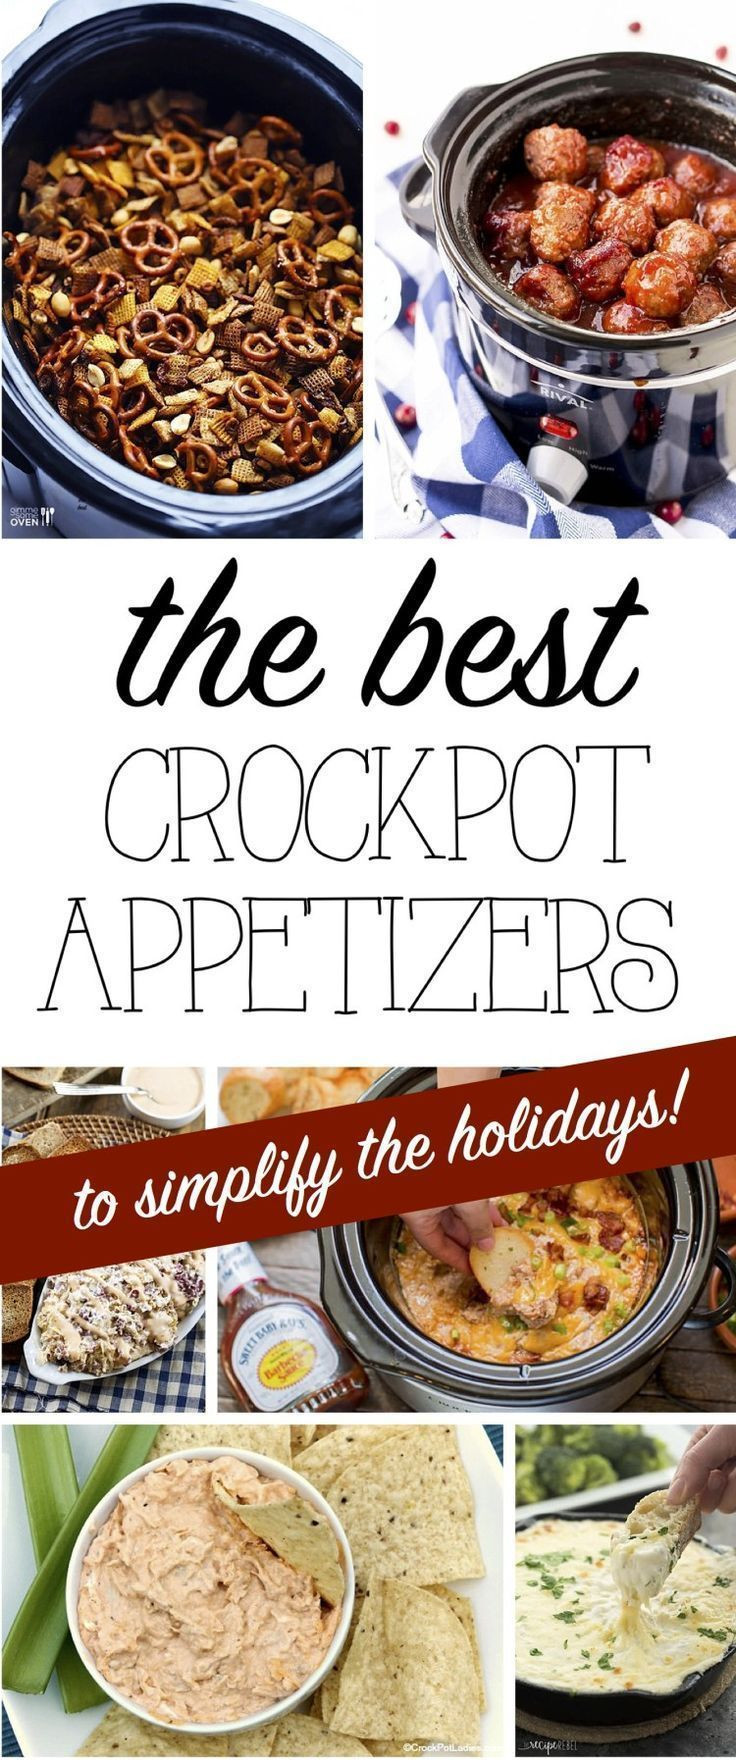 Best Crockpot Recipes For Kids
 The Best Crockpot Appetizers to Simplify Your Holidays